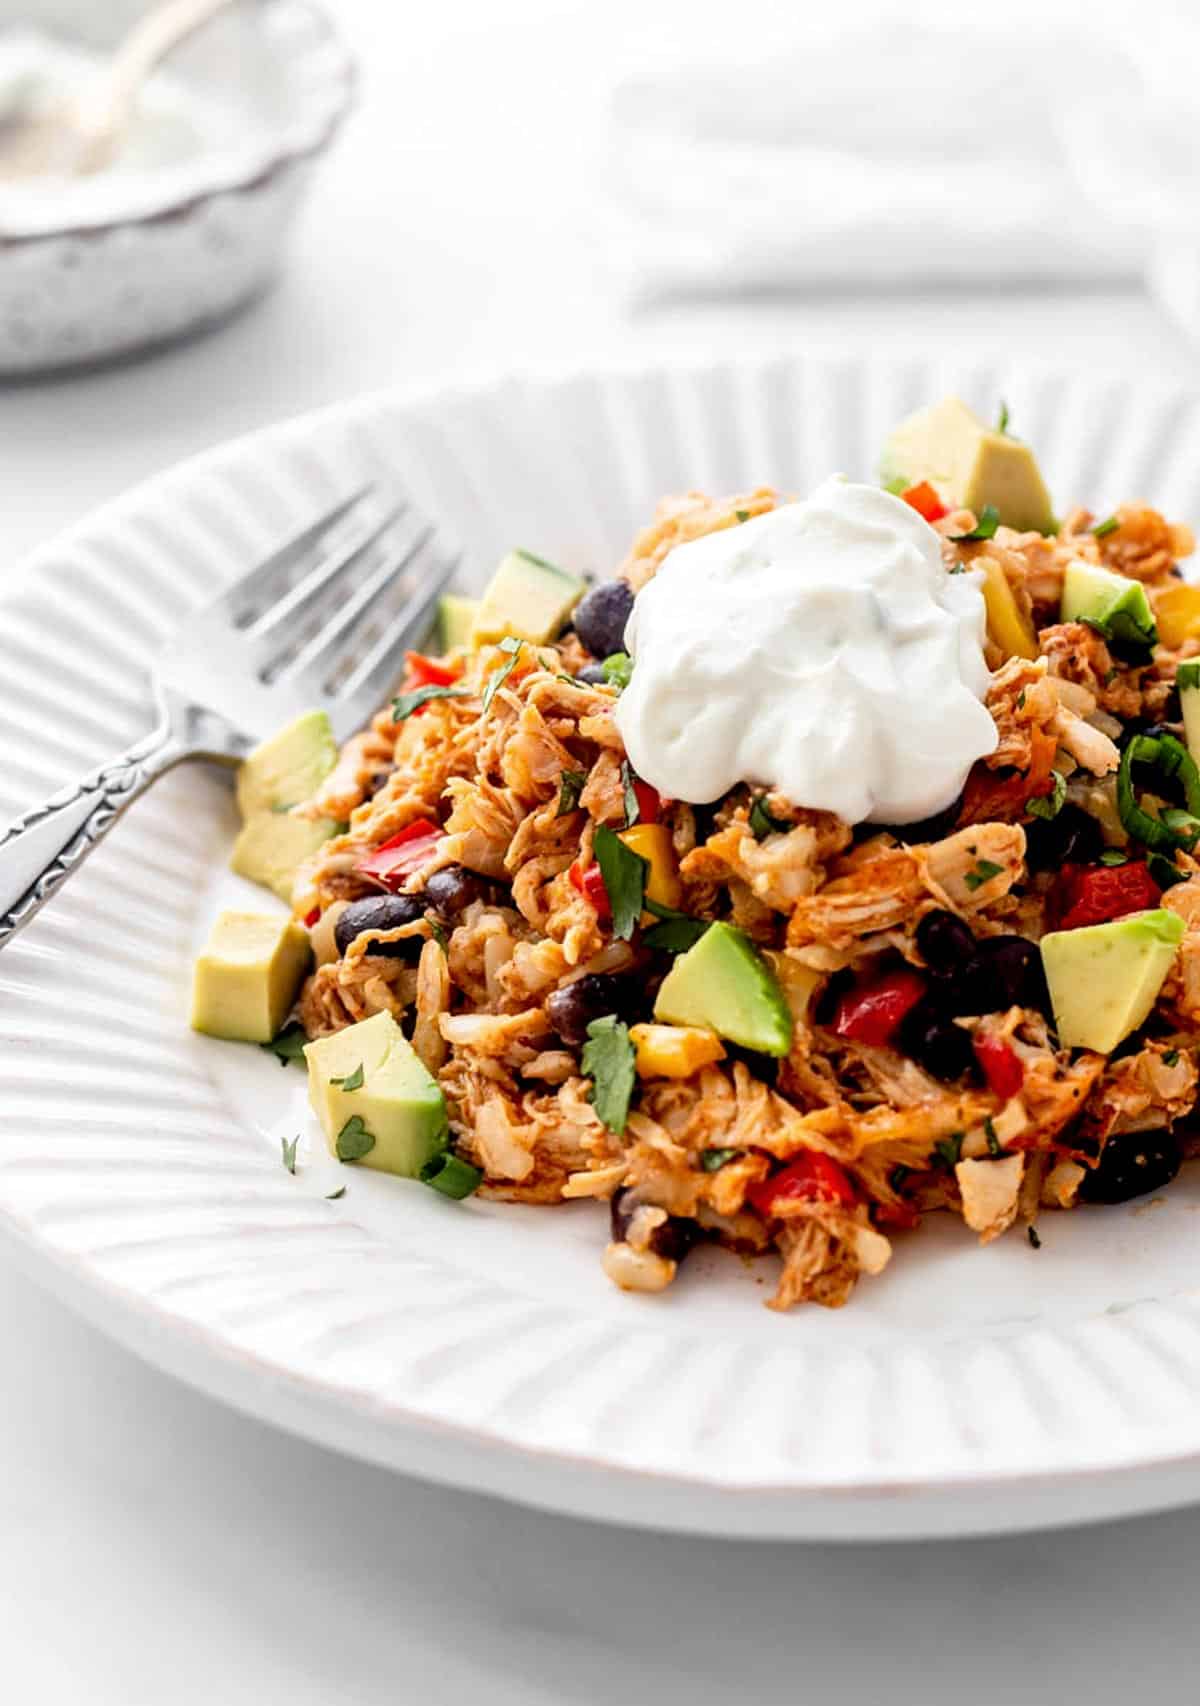 A helping of chicken burrito casserole on a plate with a dollop of Greek yogurt and diced avocado.